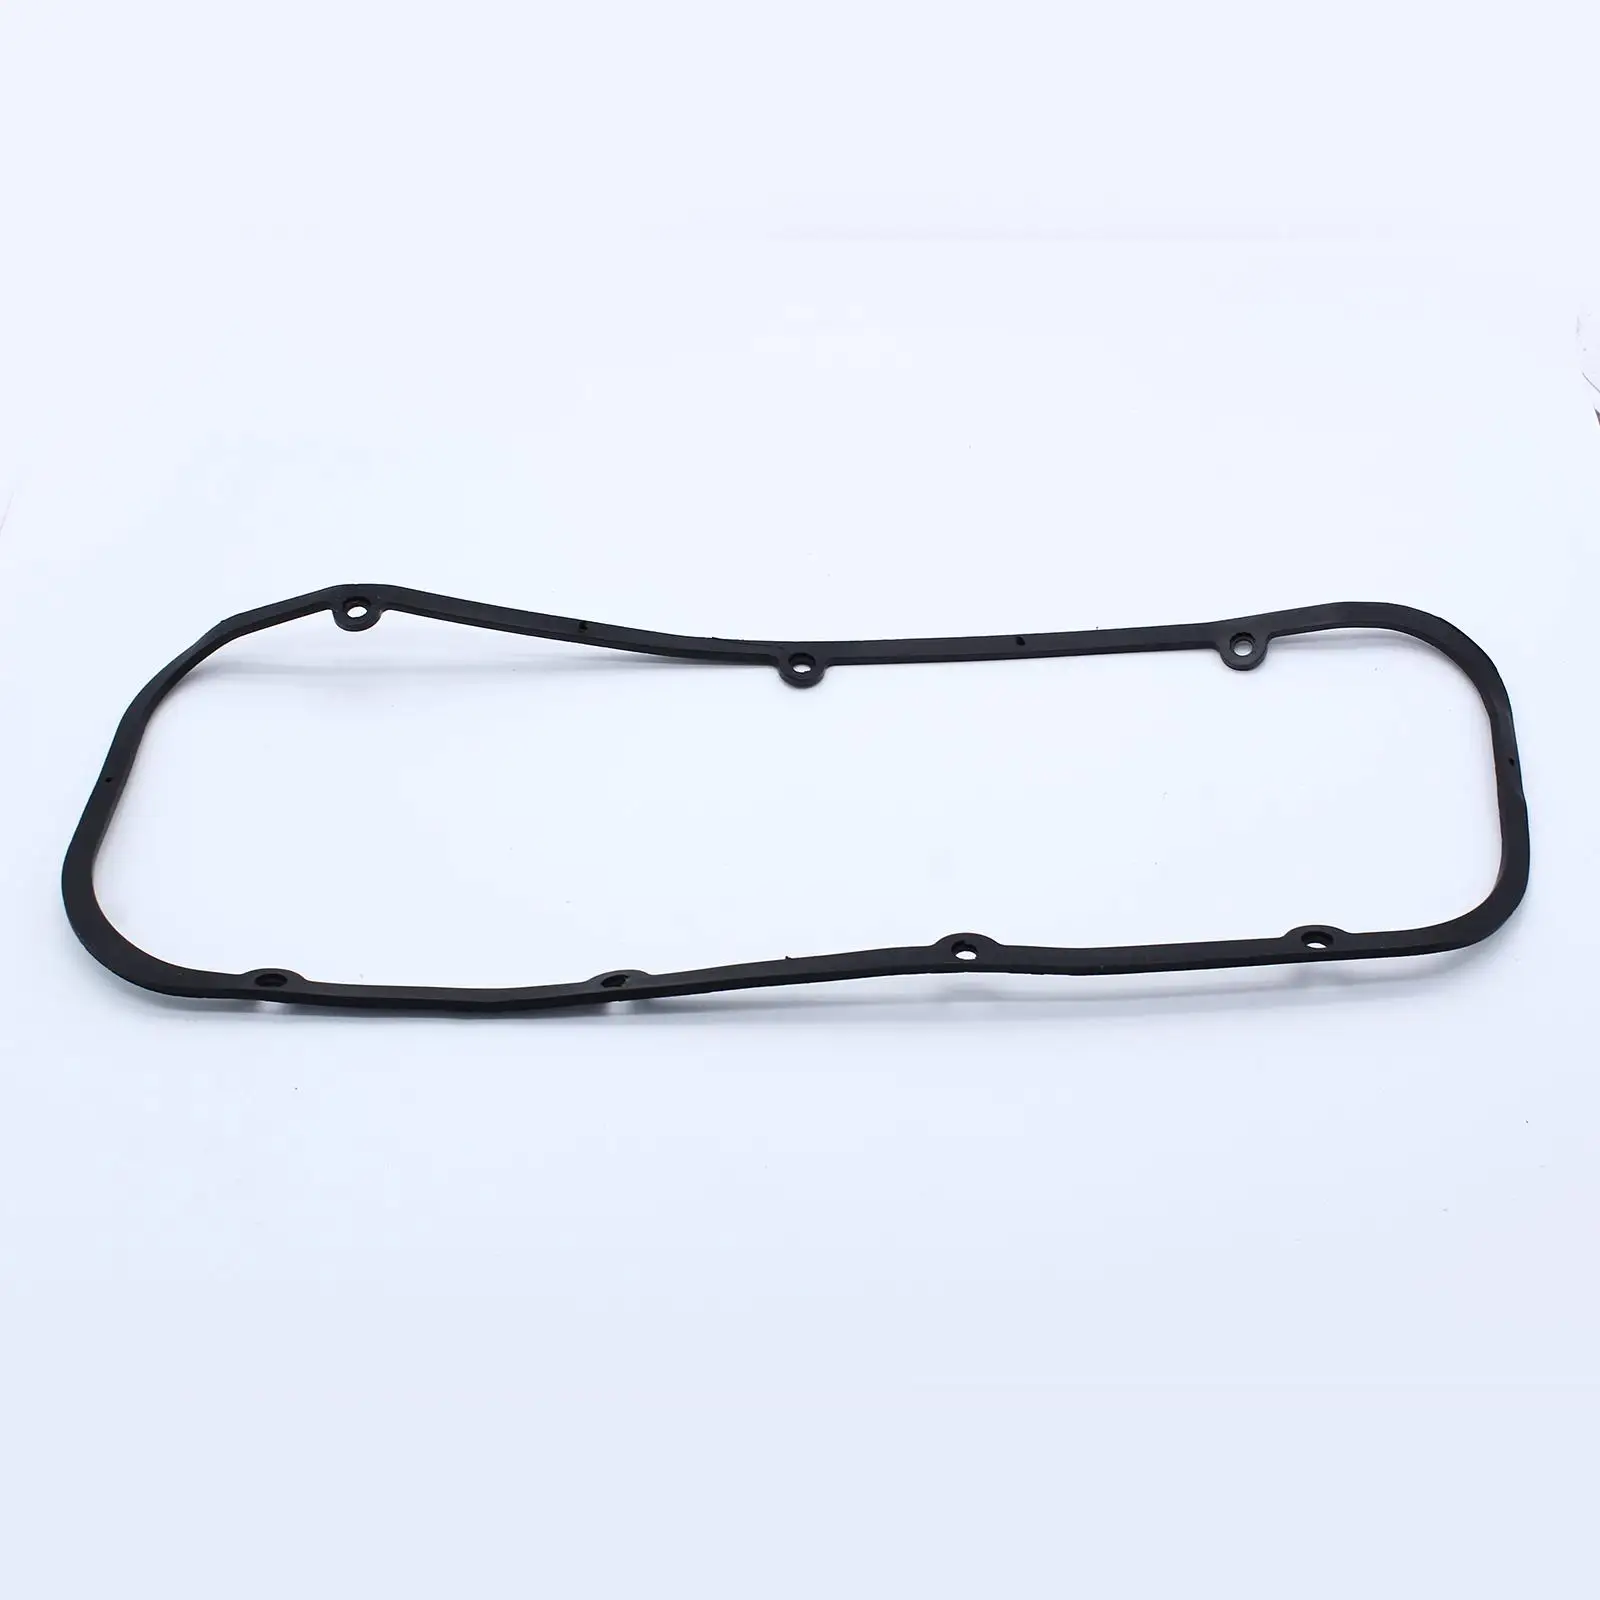 Steel Core Valve Cover Gaskets Gaskets Seals for Chevy BB 396 427 454